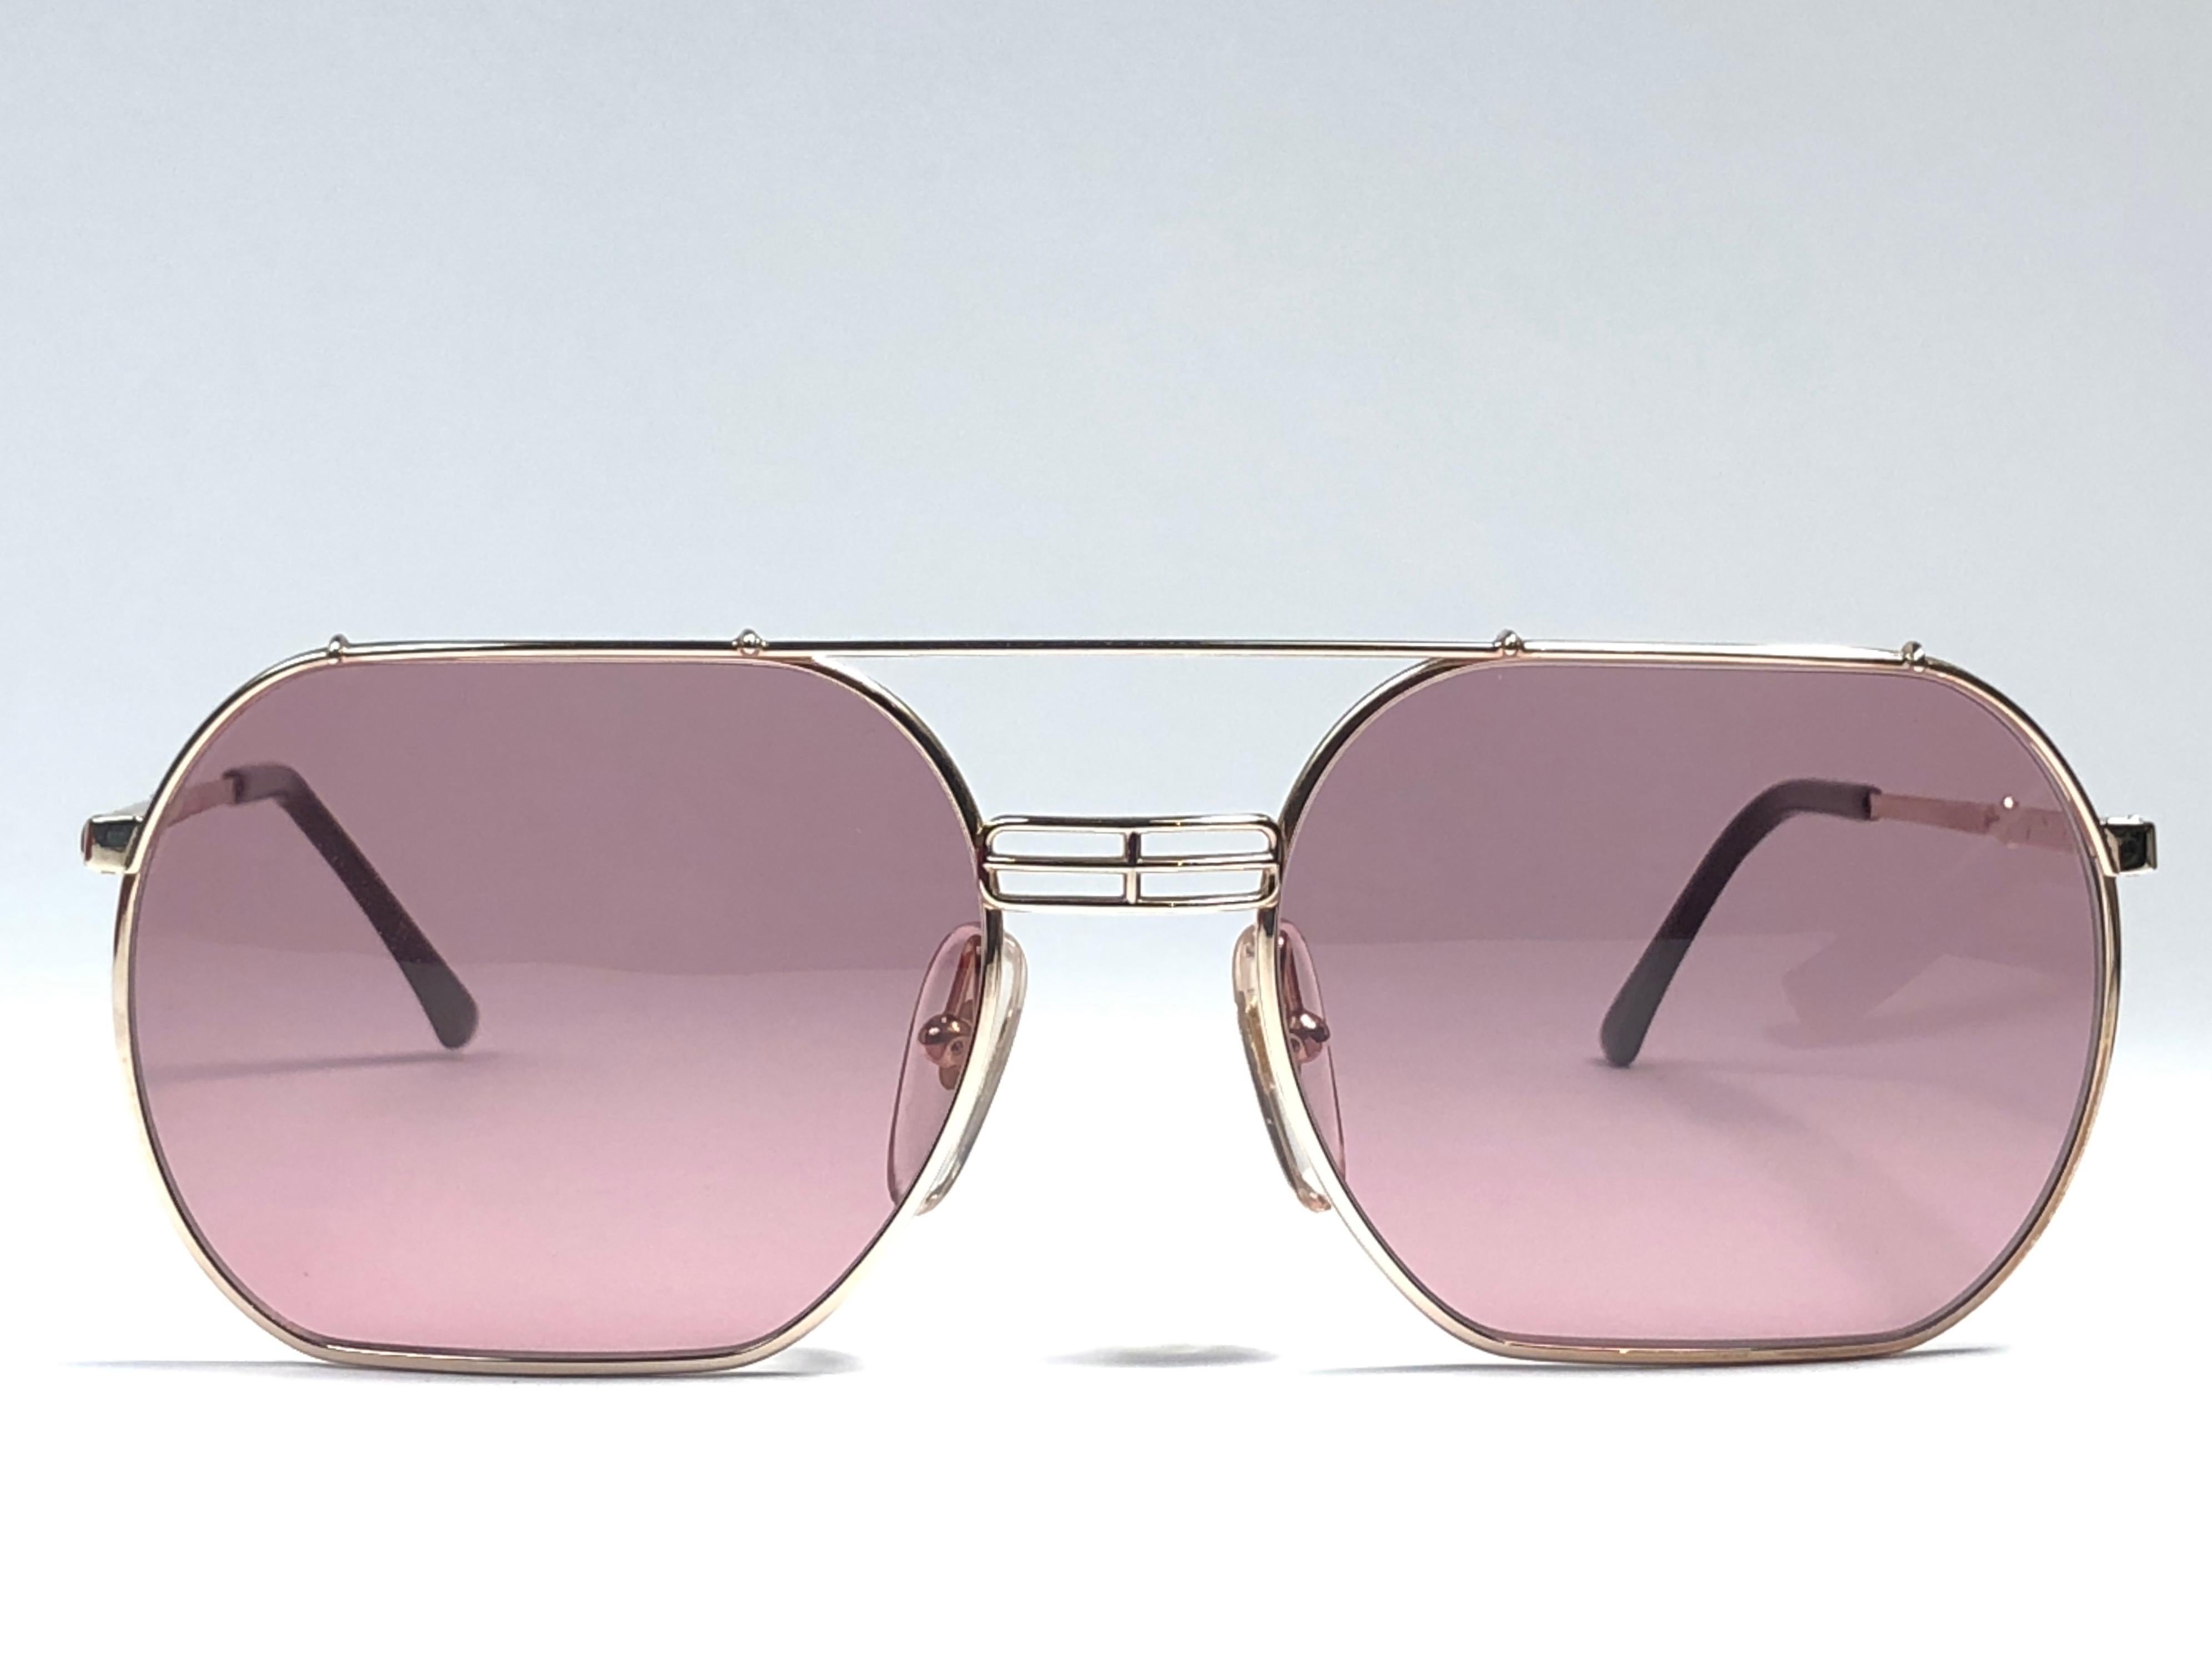 New vintage Christian Dior Monsieur Silver 2363 sunglasses. .

Spotless medium rose lenses.

Comes with it original CD Monsieur sleeve.

New, never worn or displayed this item may show light sign of wear due to storage.

Made in Austria

FRONT : 14